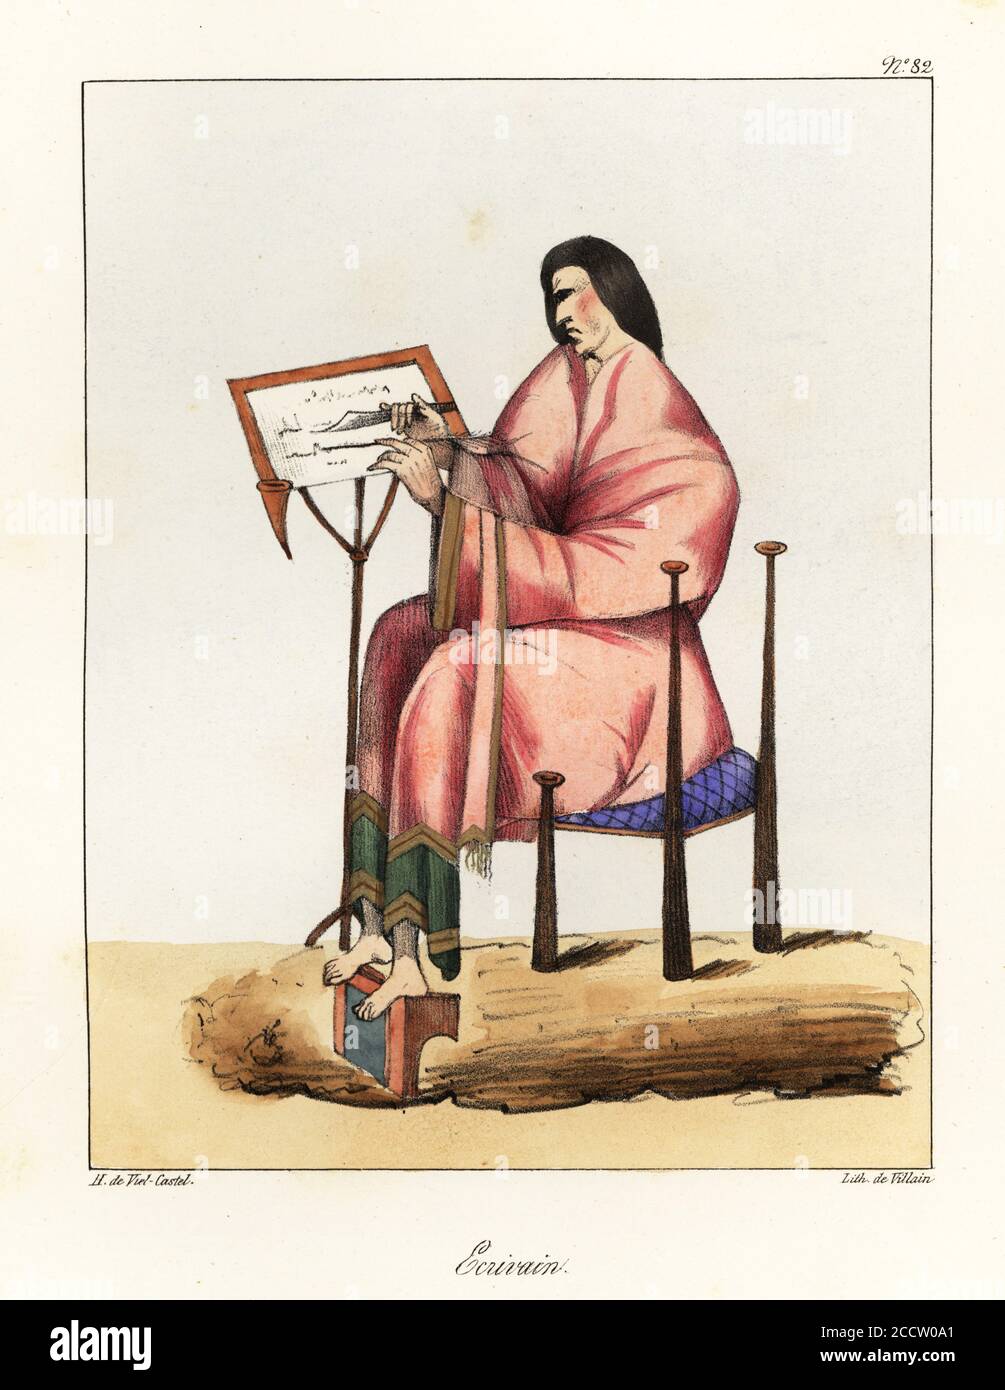 Scribe at work with quill and knife at a writing desk, seated on a chair with footrest, 9th century. Ecrivain. Handcoloured lithograph by Villain after an illustration by Horace de Viel-Castel from his Collection des costumes, armes et meubles pour servir à l'histoire de la France (Collection of costumes, weapons and furniture to be used in the history of France), Treuttel & Wurtz, Bossange, 1827. Stock Photo